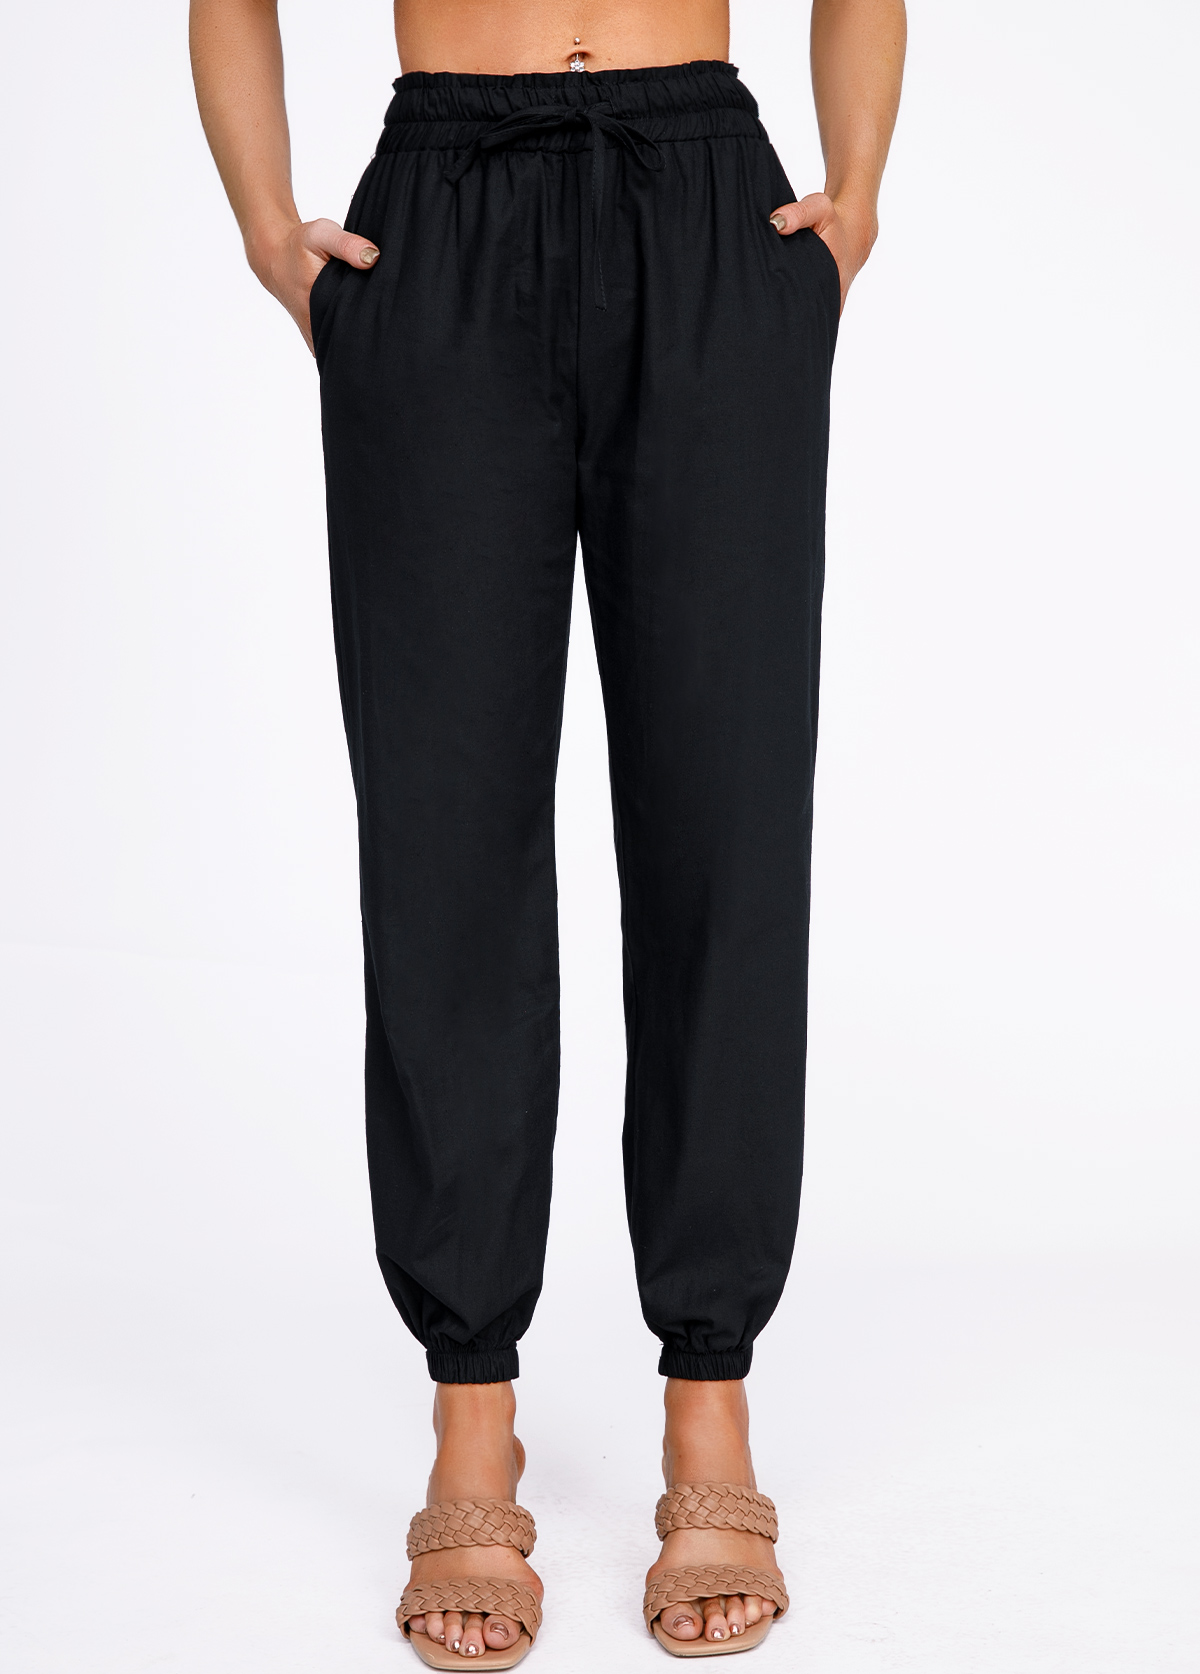 Drawstring Black High Waisted Belted Pants